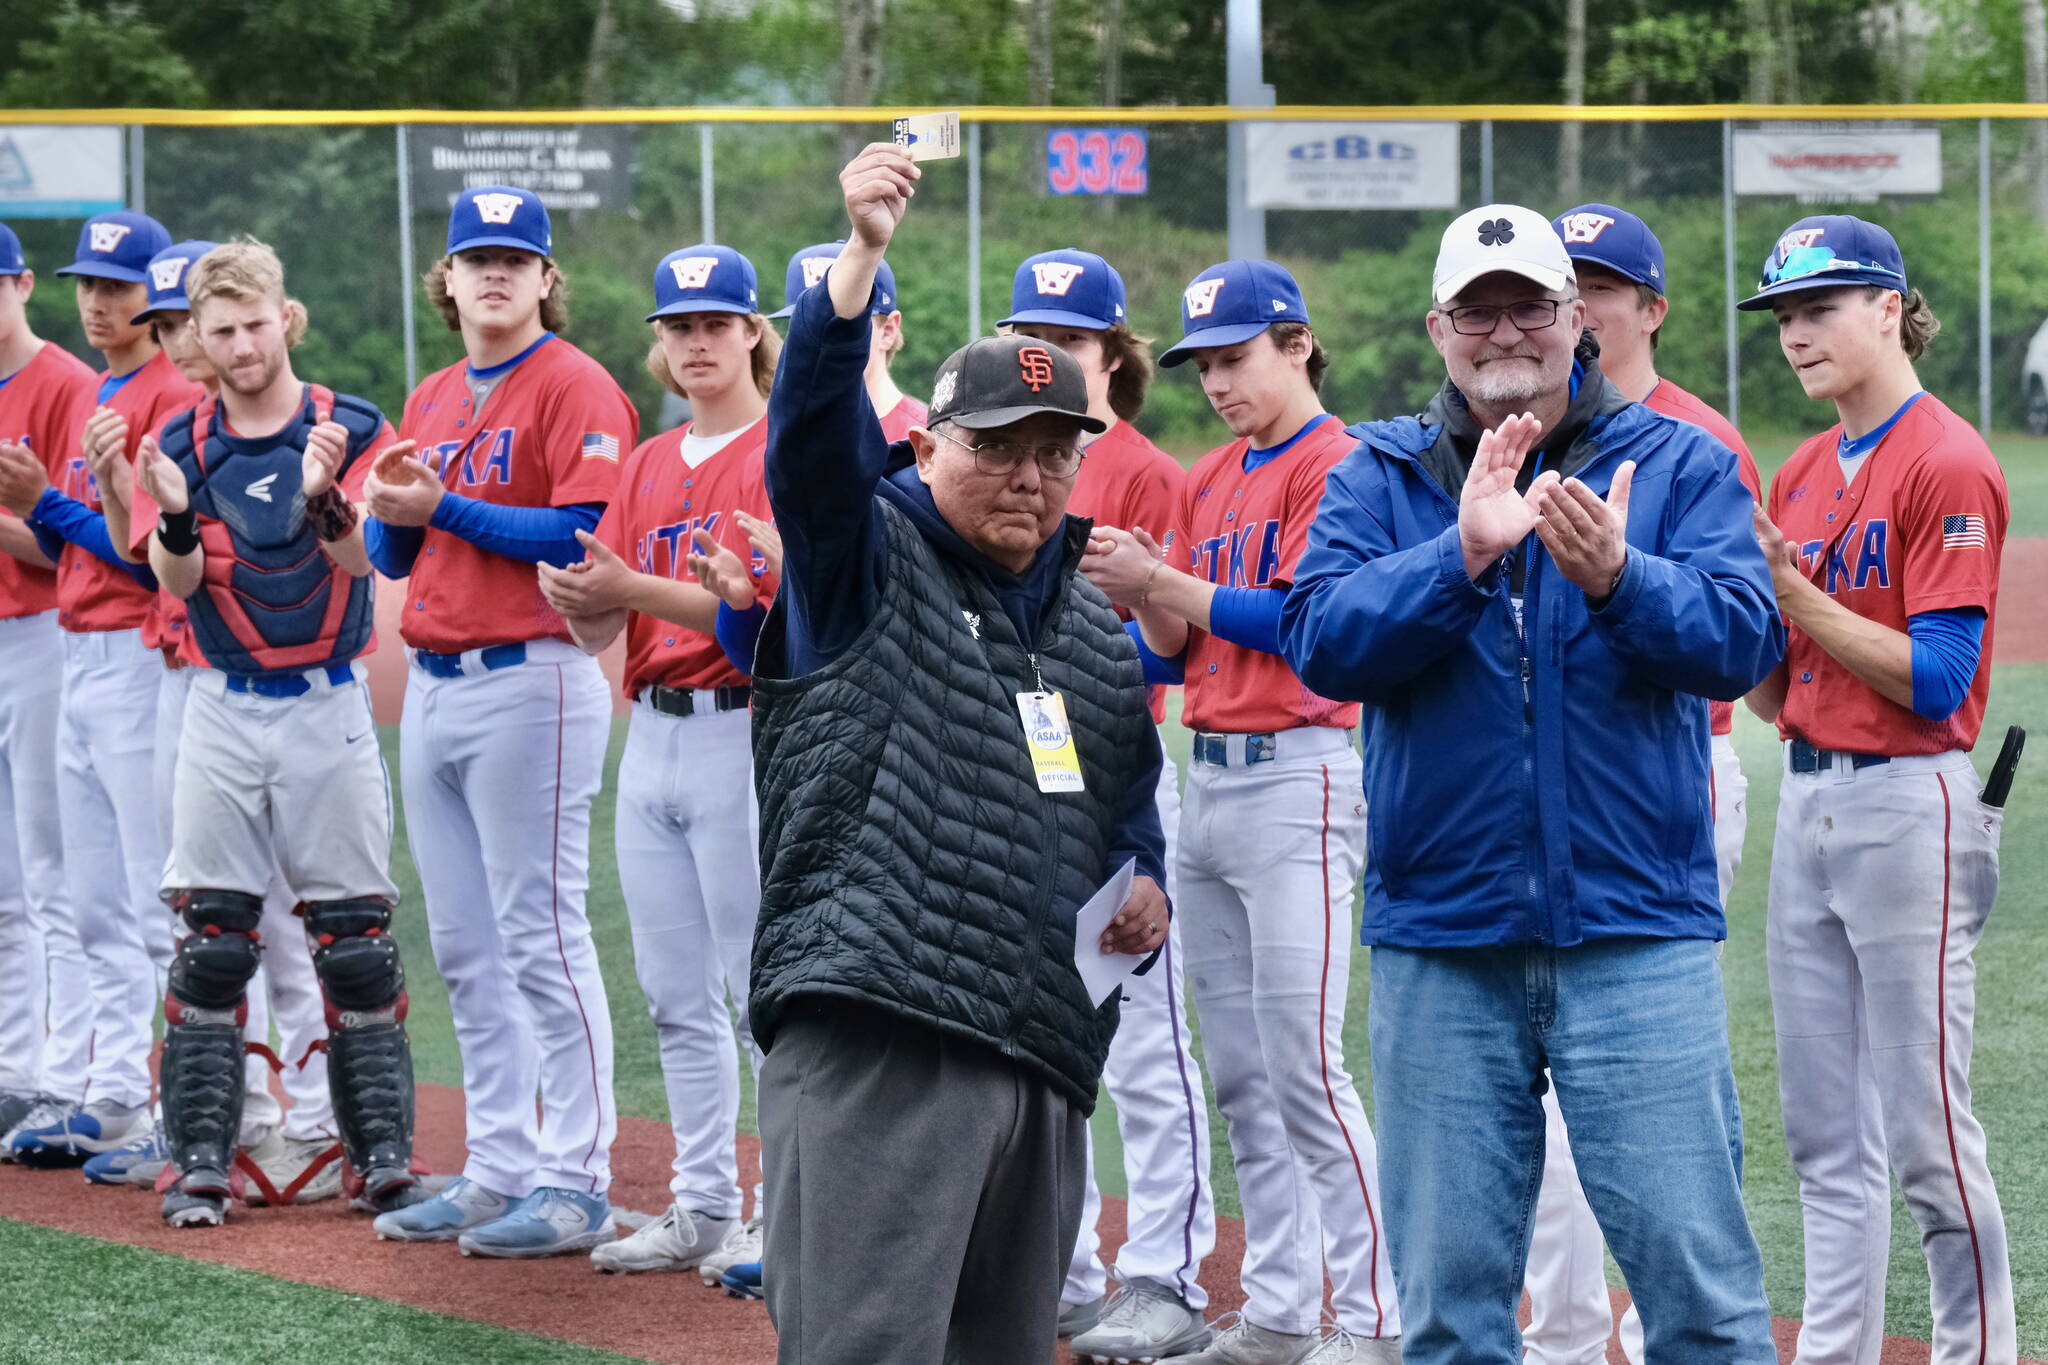 Lawrence “Woody” Widmark holds up his Alaska School Activities Association Gold Lifetime Pass as Sitka Wolves players and ASAA executive director Billy Strickland applaud during the presentation at the ASAA State Baseball Championships in Sitka last week. (Klas Stolpe / Juneau Empire)